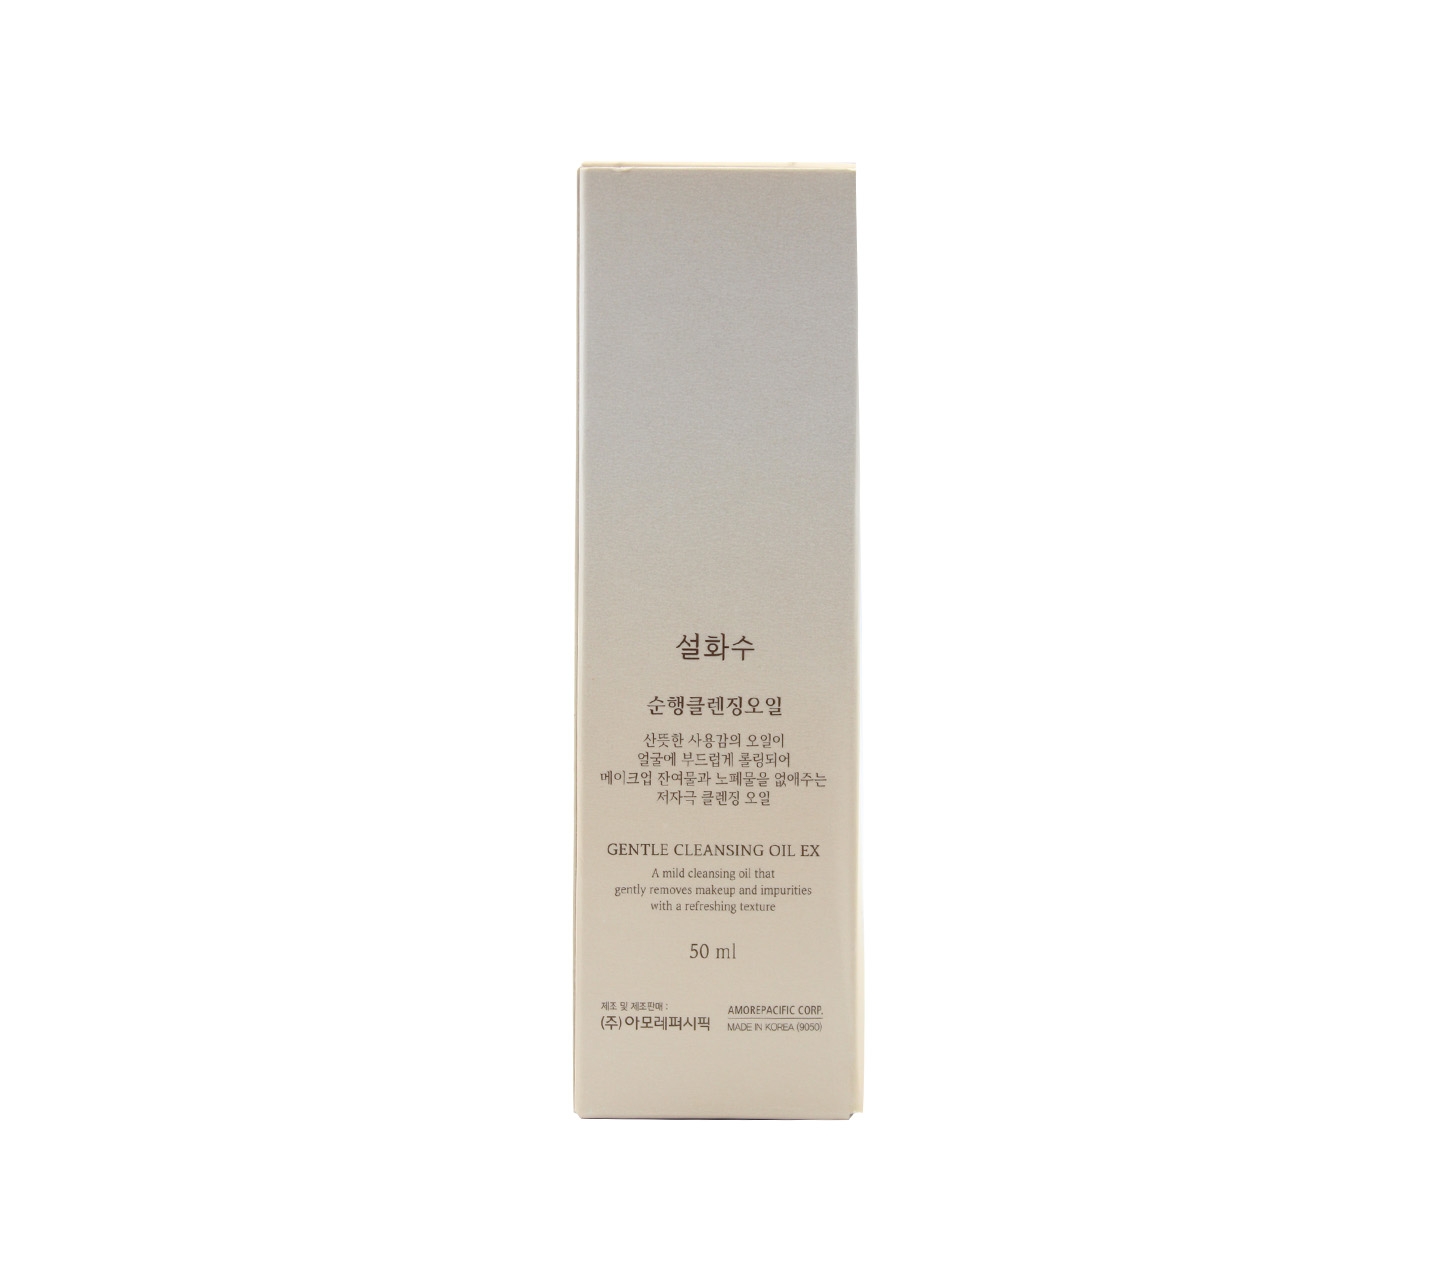 Sulwhasoo Gentle Cleansing Oil Ex Skin Care